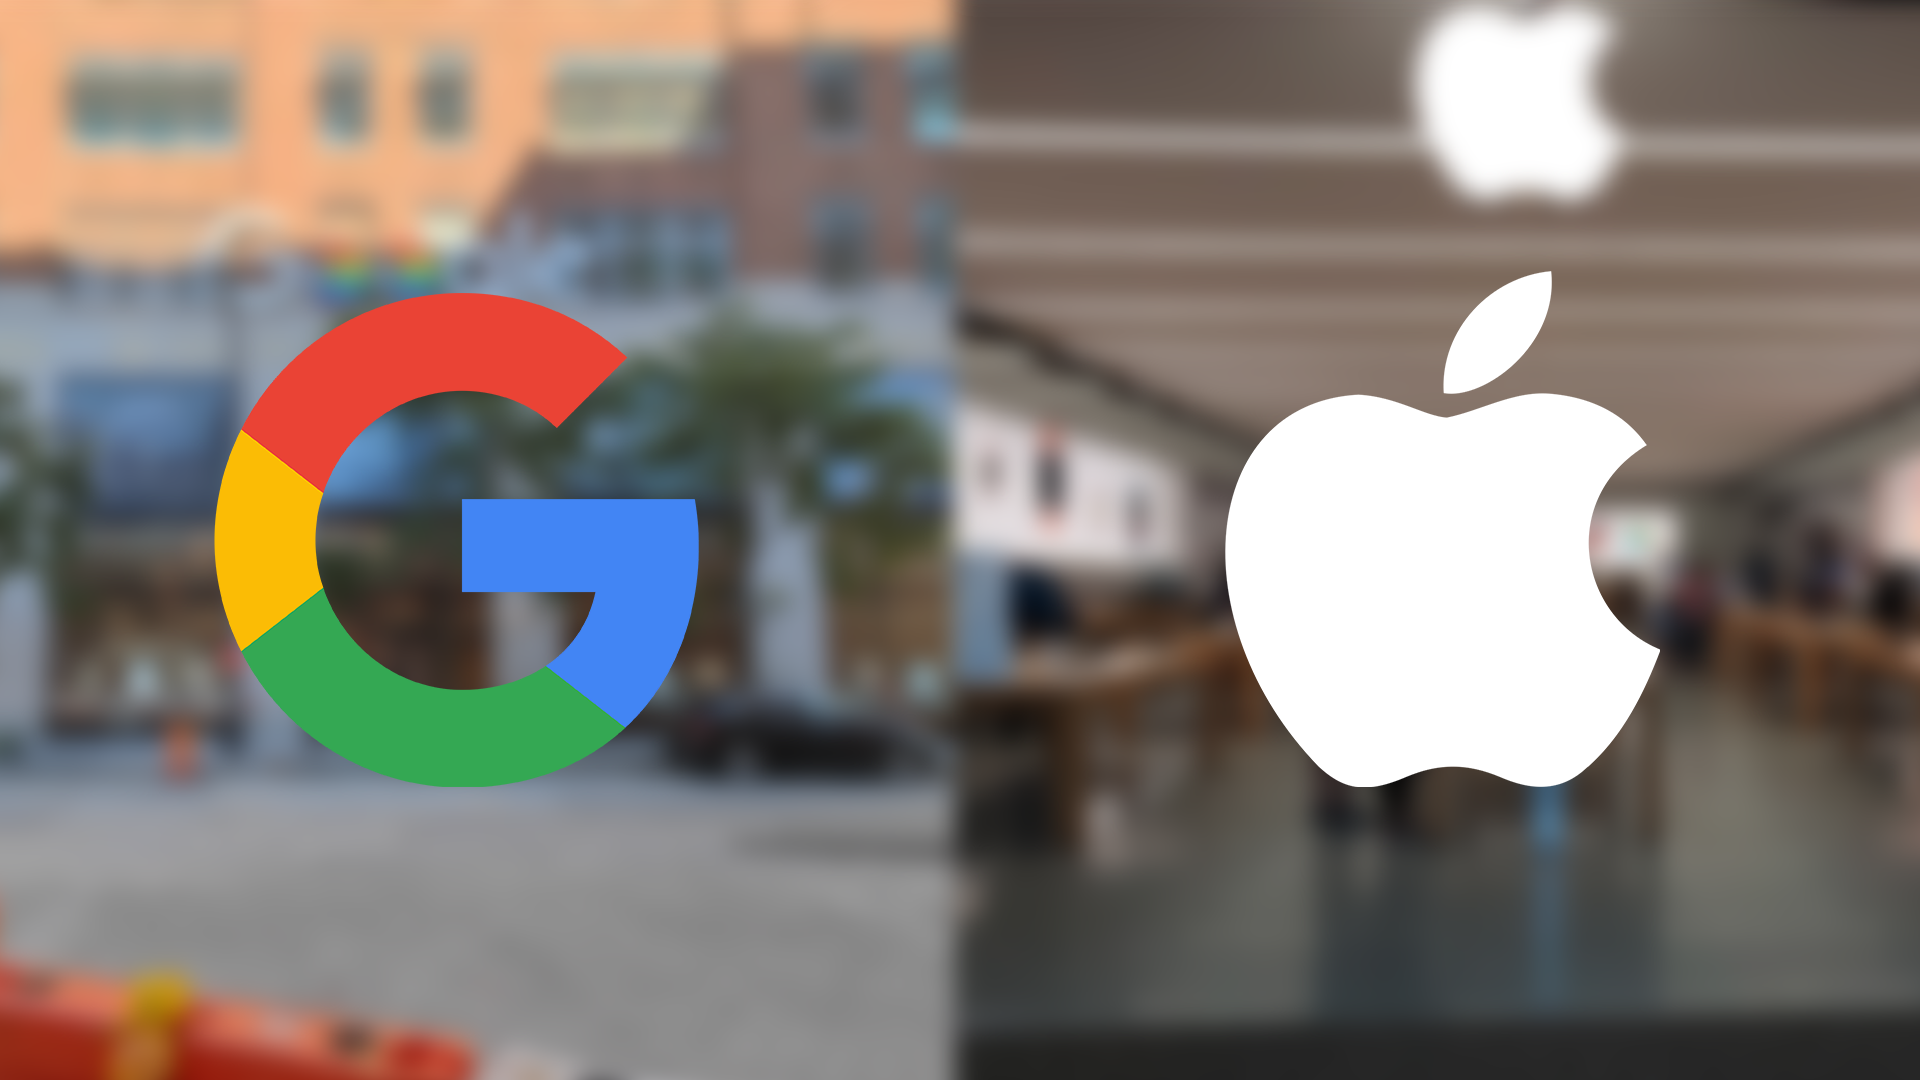 An Apple and Google logo next to each other with a blurred image of their respective stores in the background